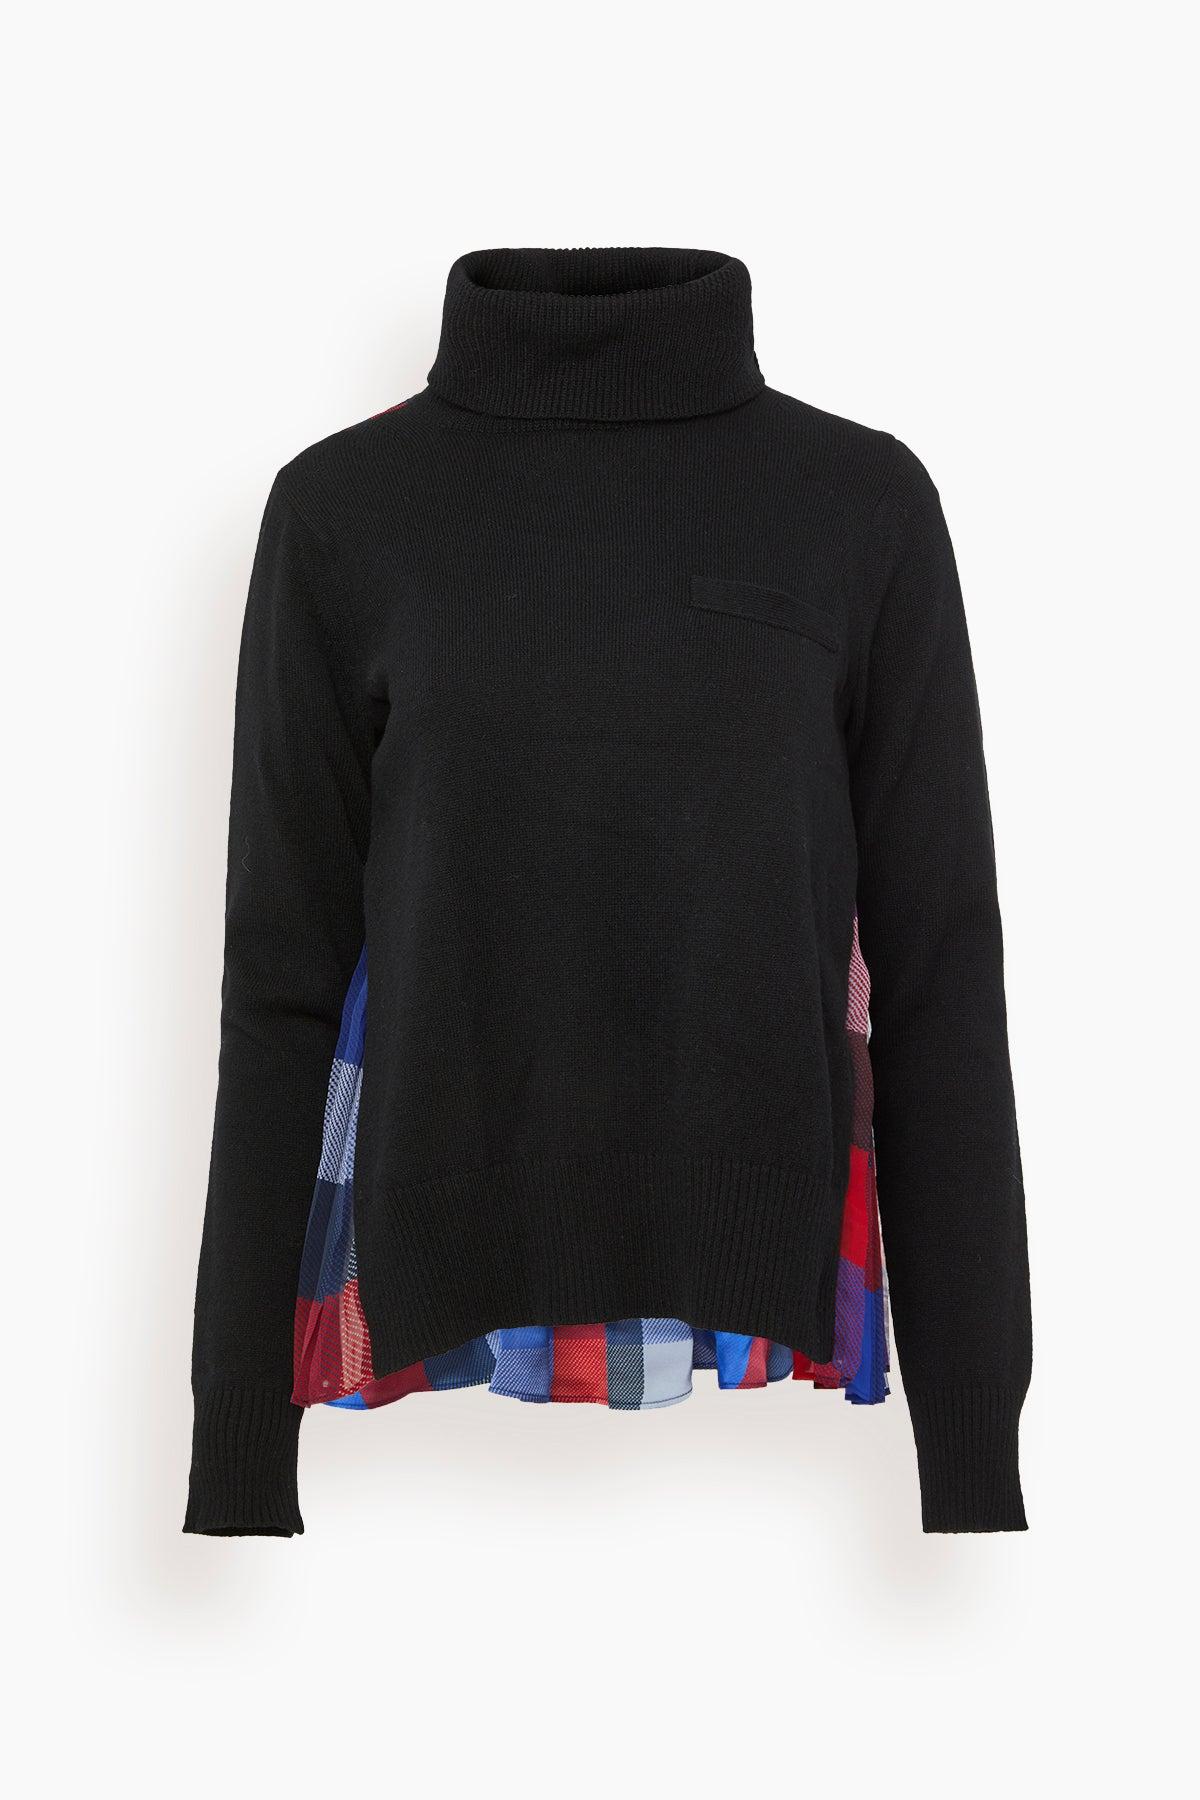 Sacai Plaid Wool Knit Pullover in Black | Lyst